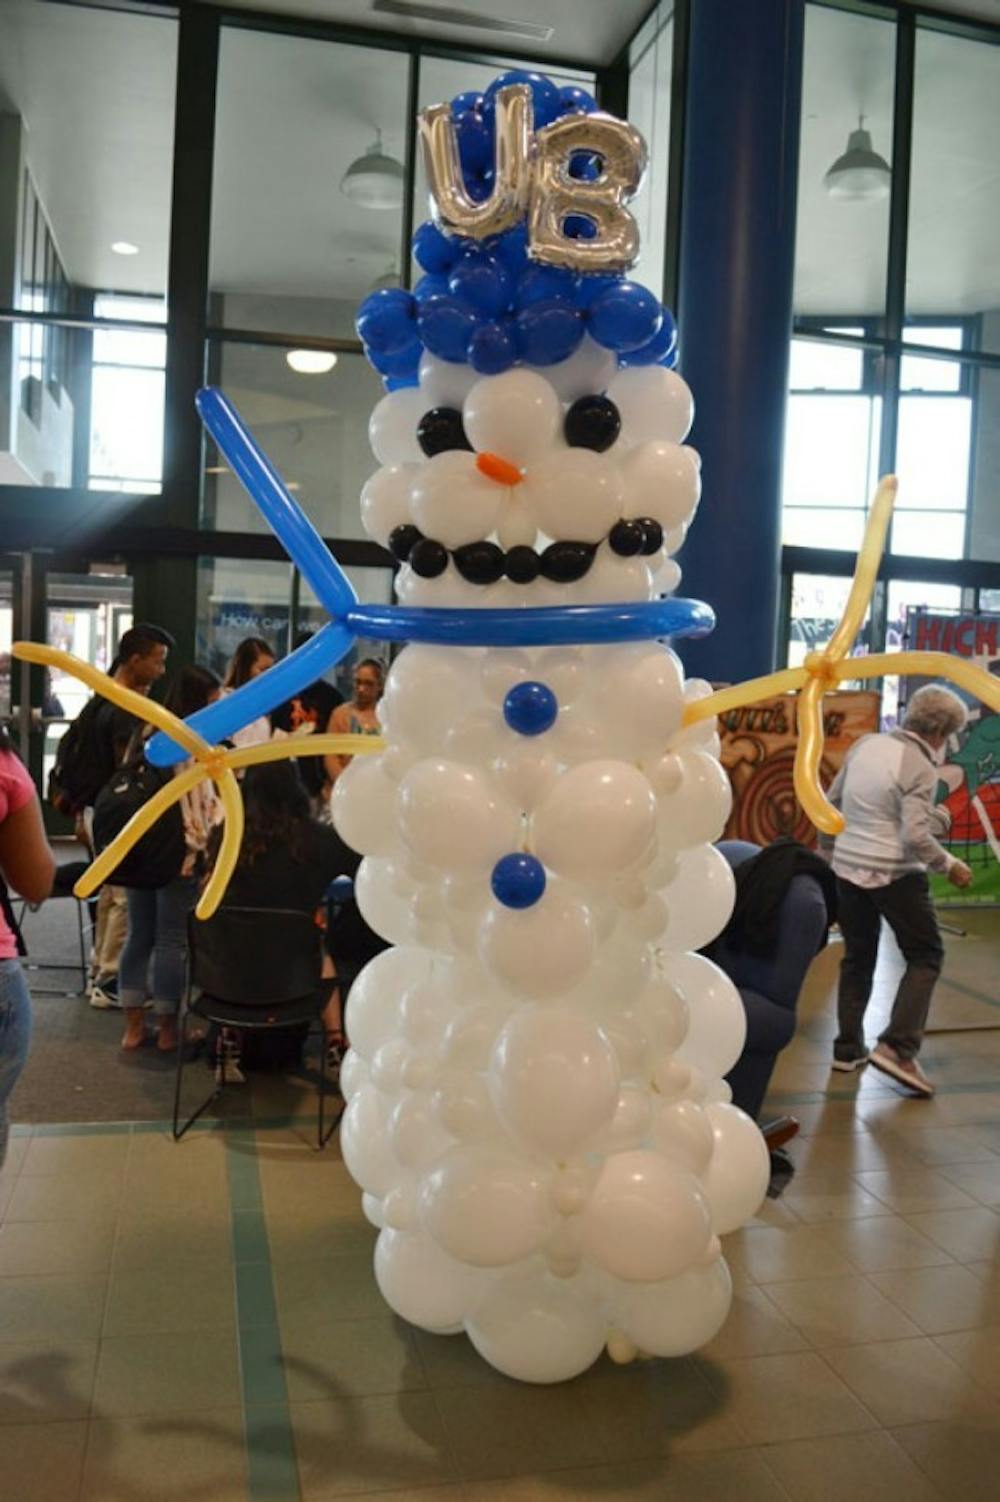 UB This Winter consists of multiple programs held over the winter session,
which includes classes, study abroad, volunteering and field trips. This past
Tuesday, UB This Winter held a carnival to kickstart their programs,
featuring an eight-foot snowman and snow cones for students.
Lily Weisberg, The Spectrum 